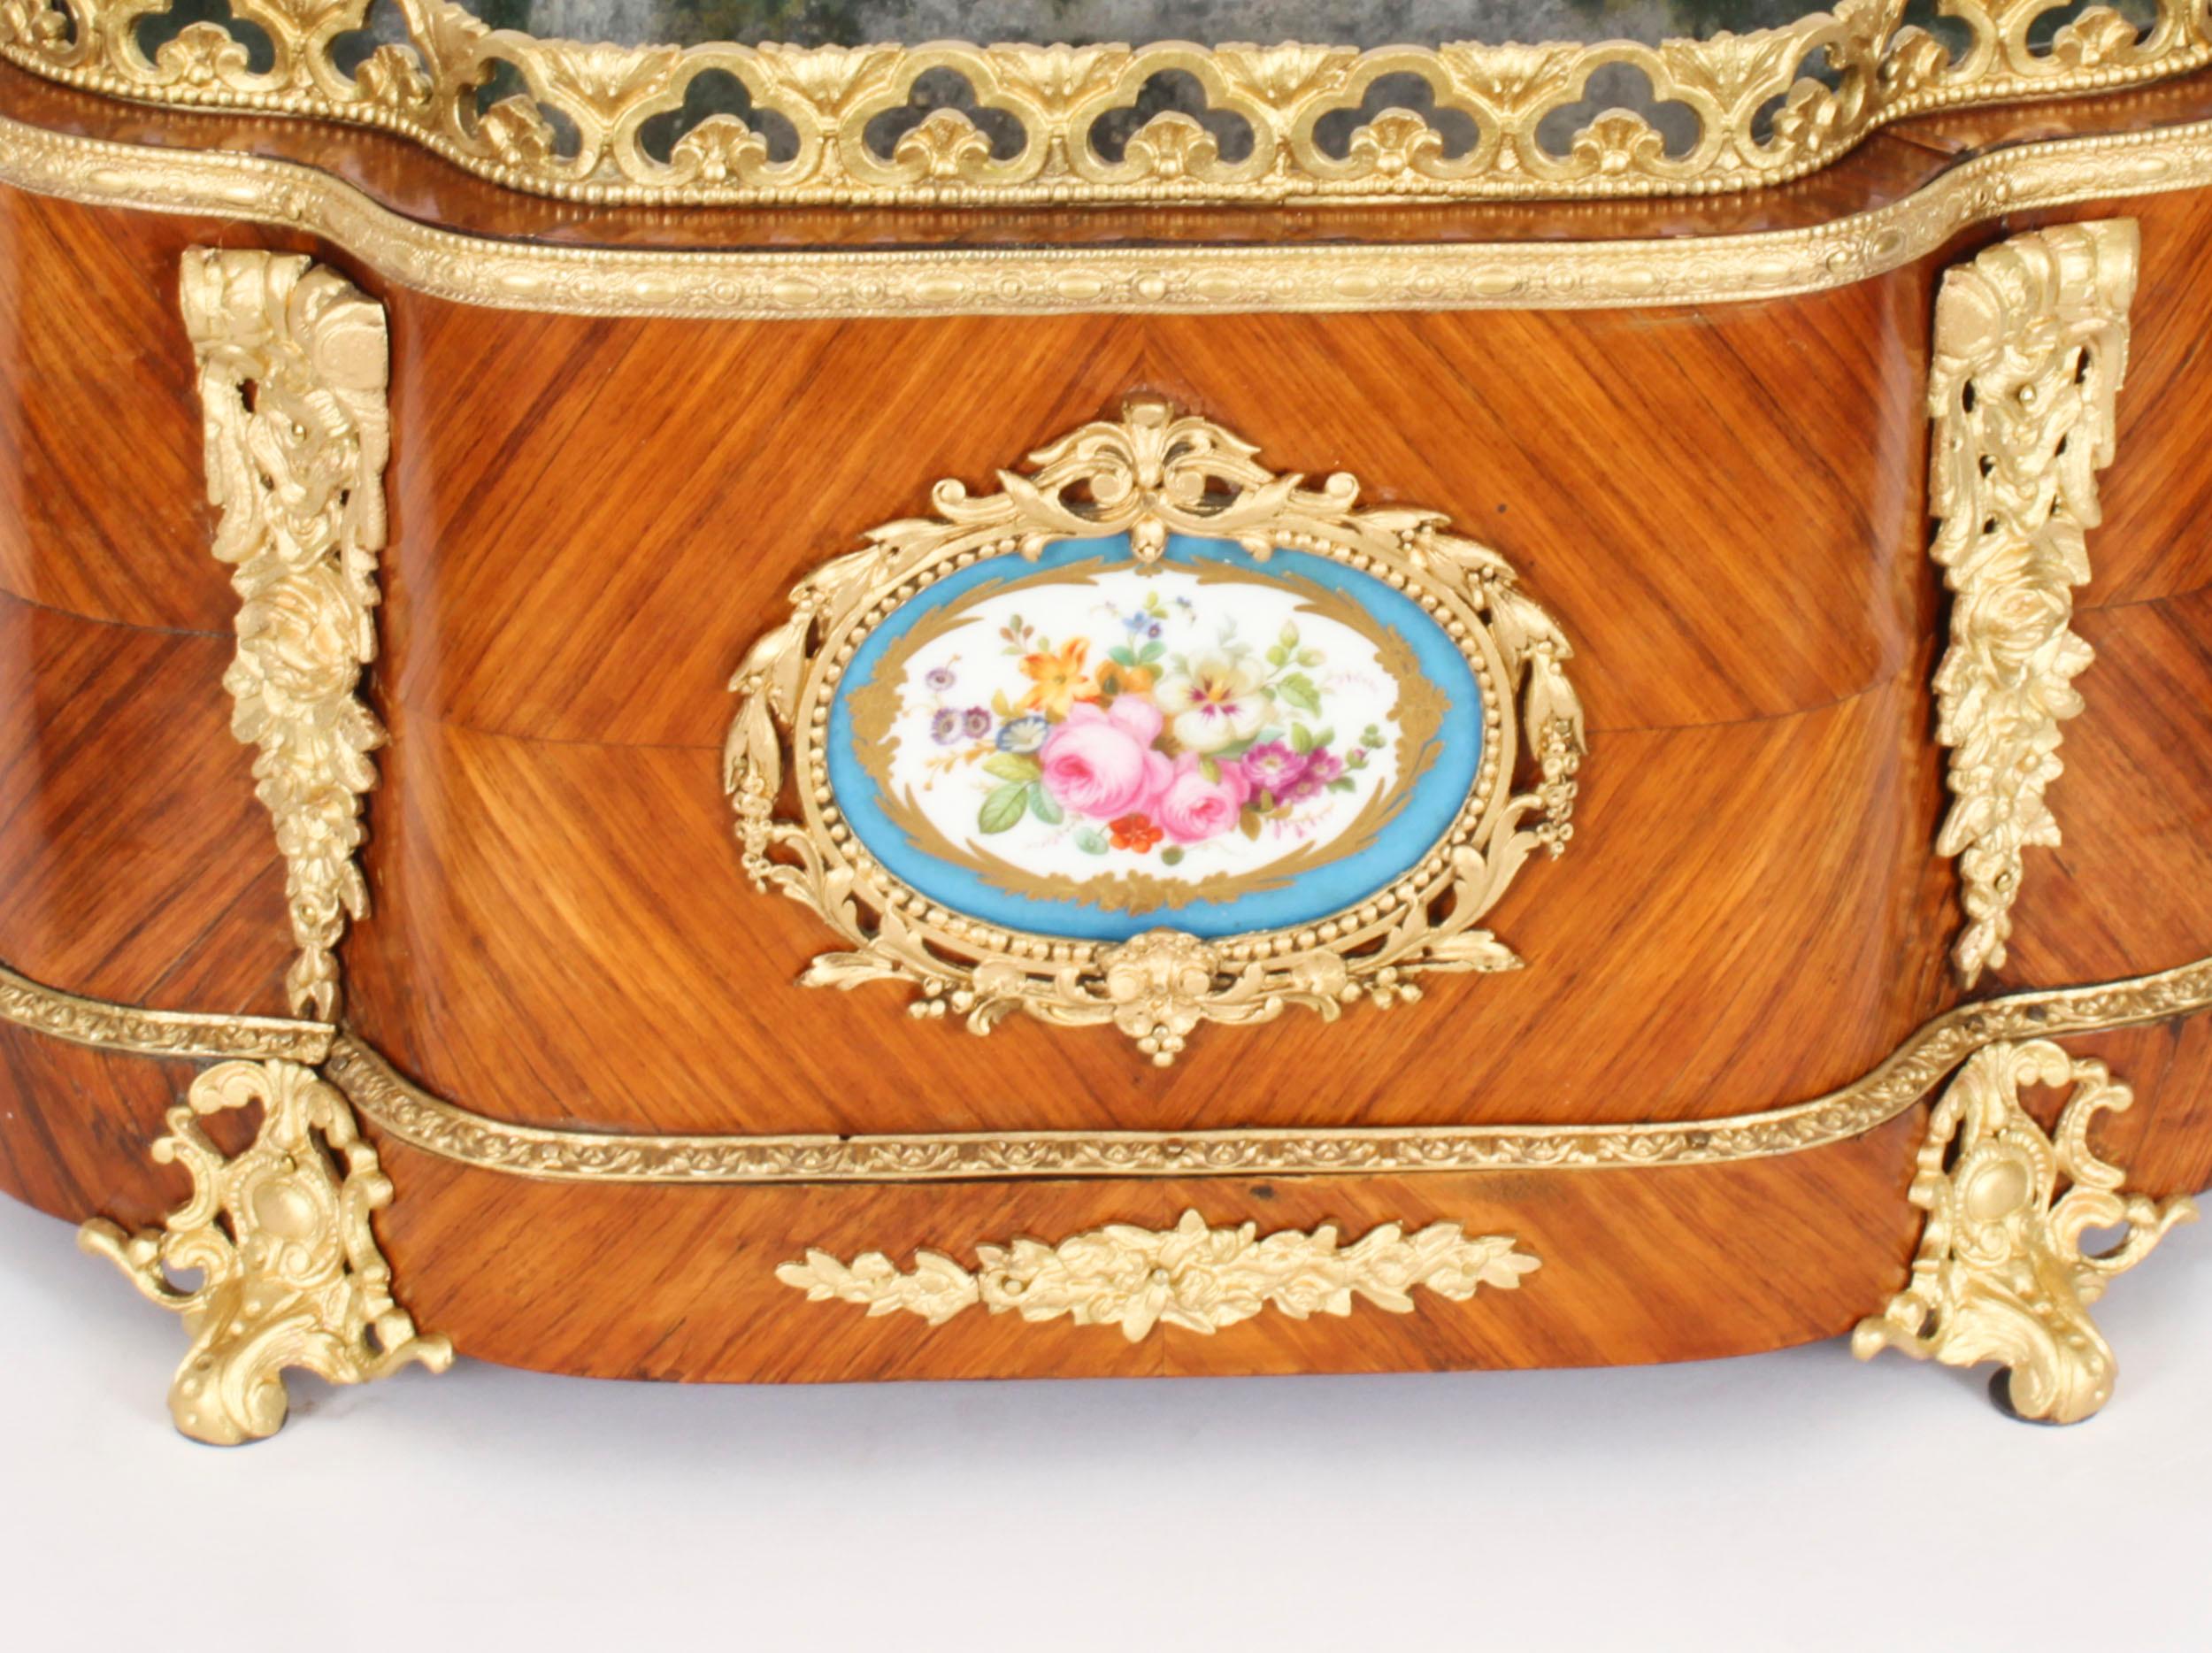 Antique French Sevres Porcelain Ormolu Mounted Planter Jardiniere 19th Century For Sale 5